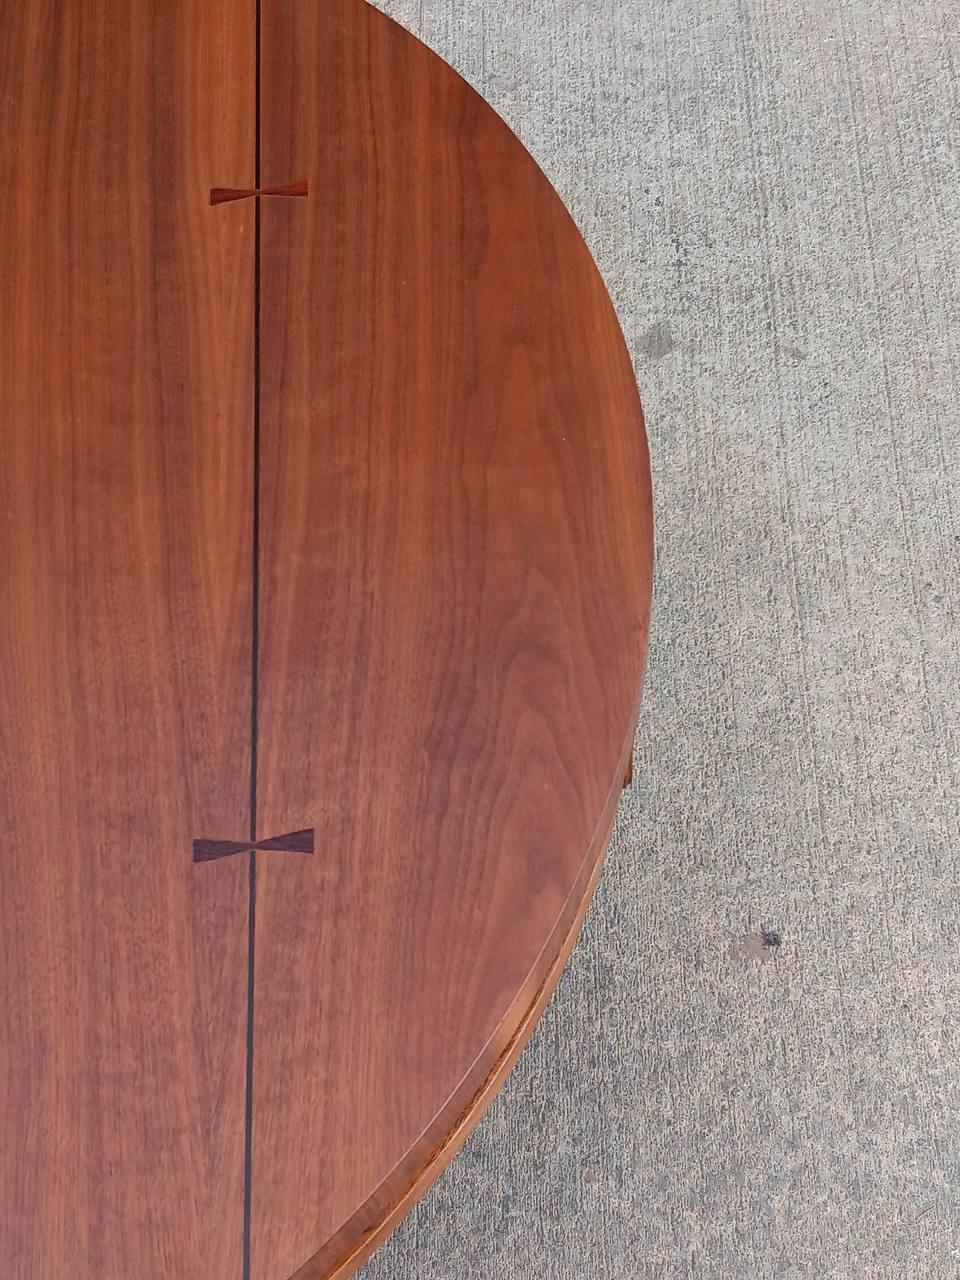 Newly Refinished -Mid-Century Modern Walnut Coffee Table Inlaid Bowtie Rosewood  For Sale 1